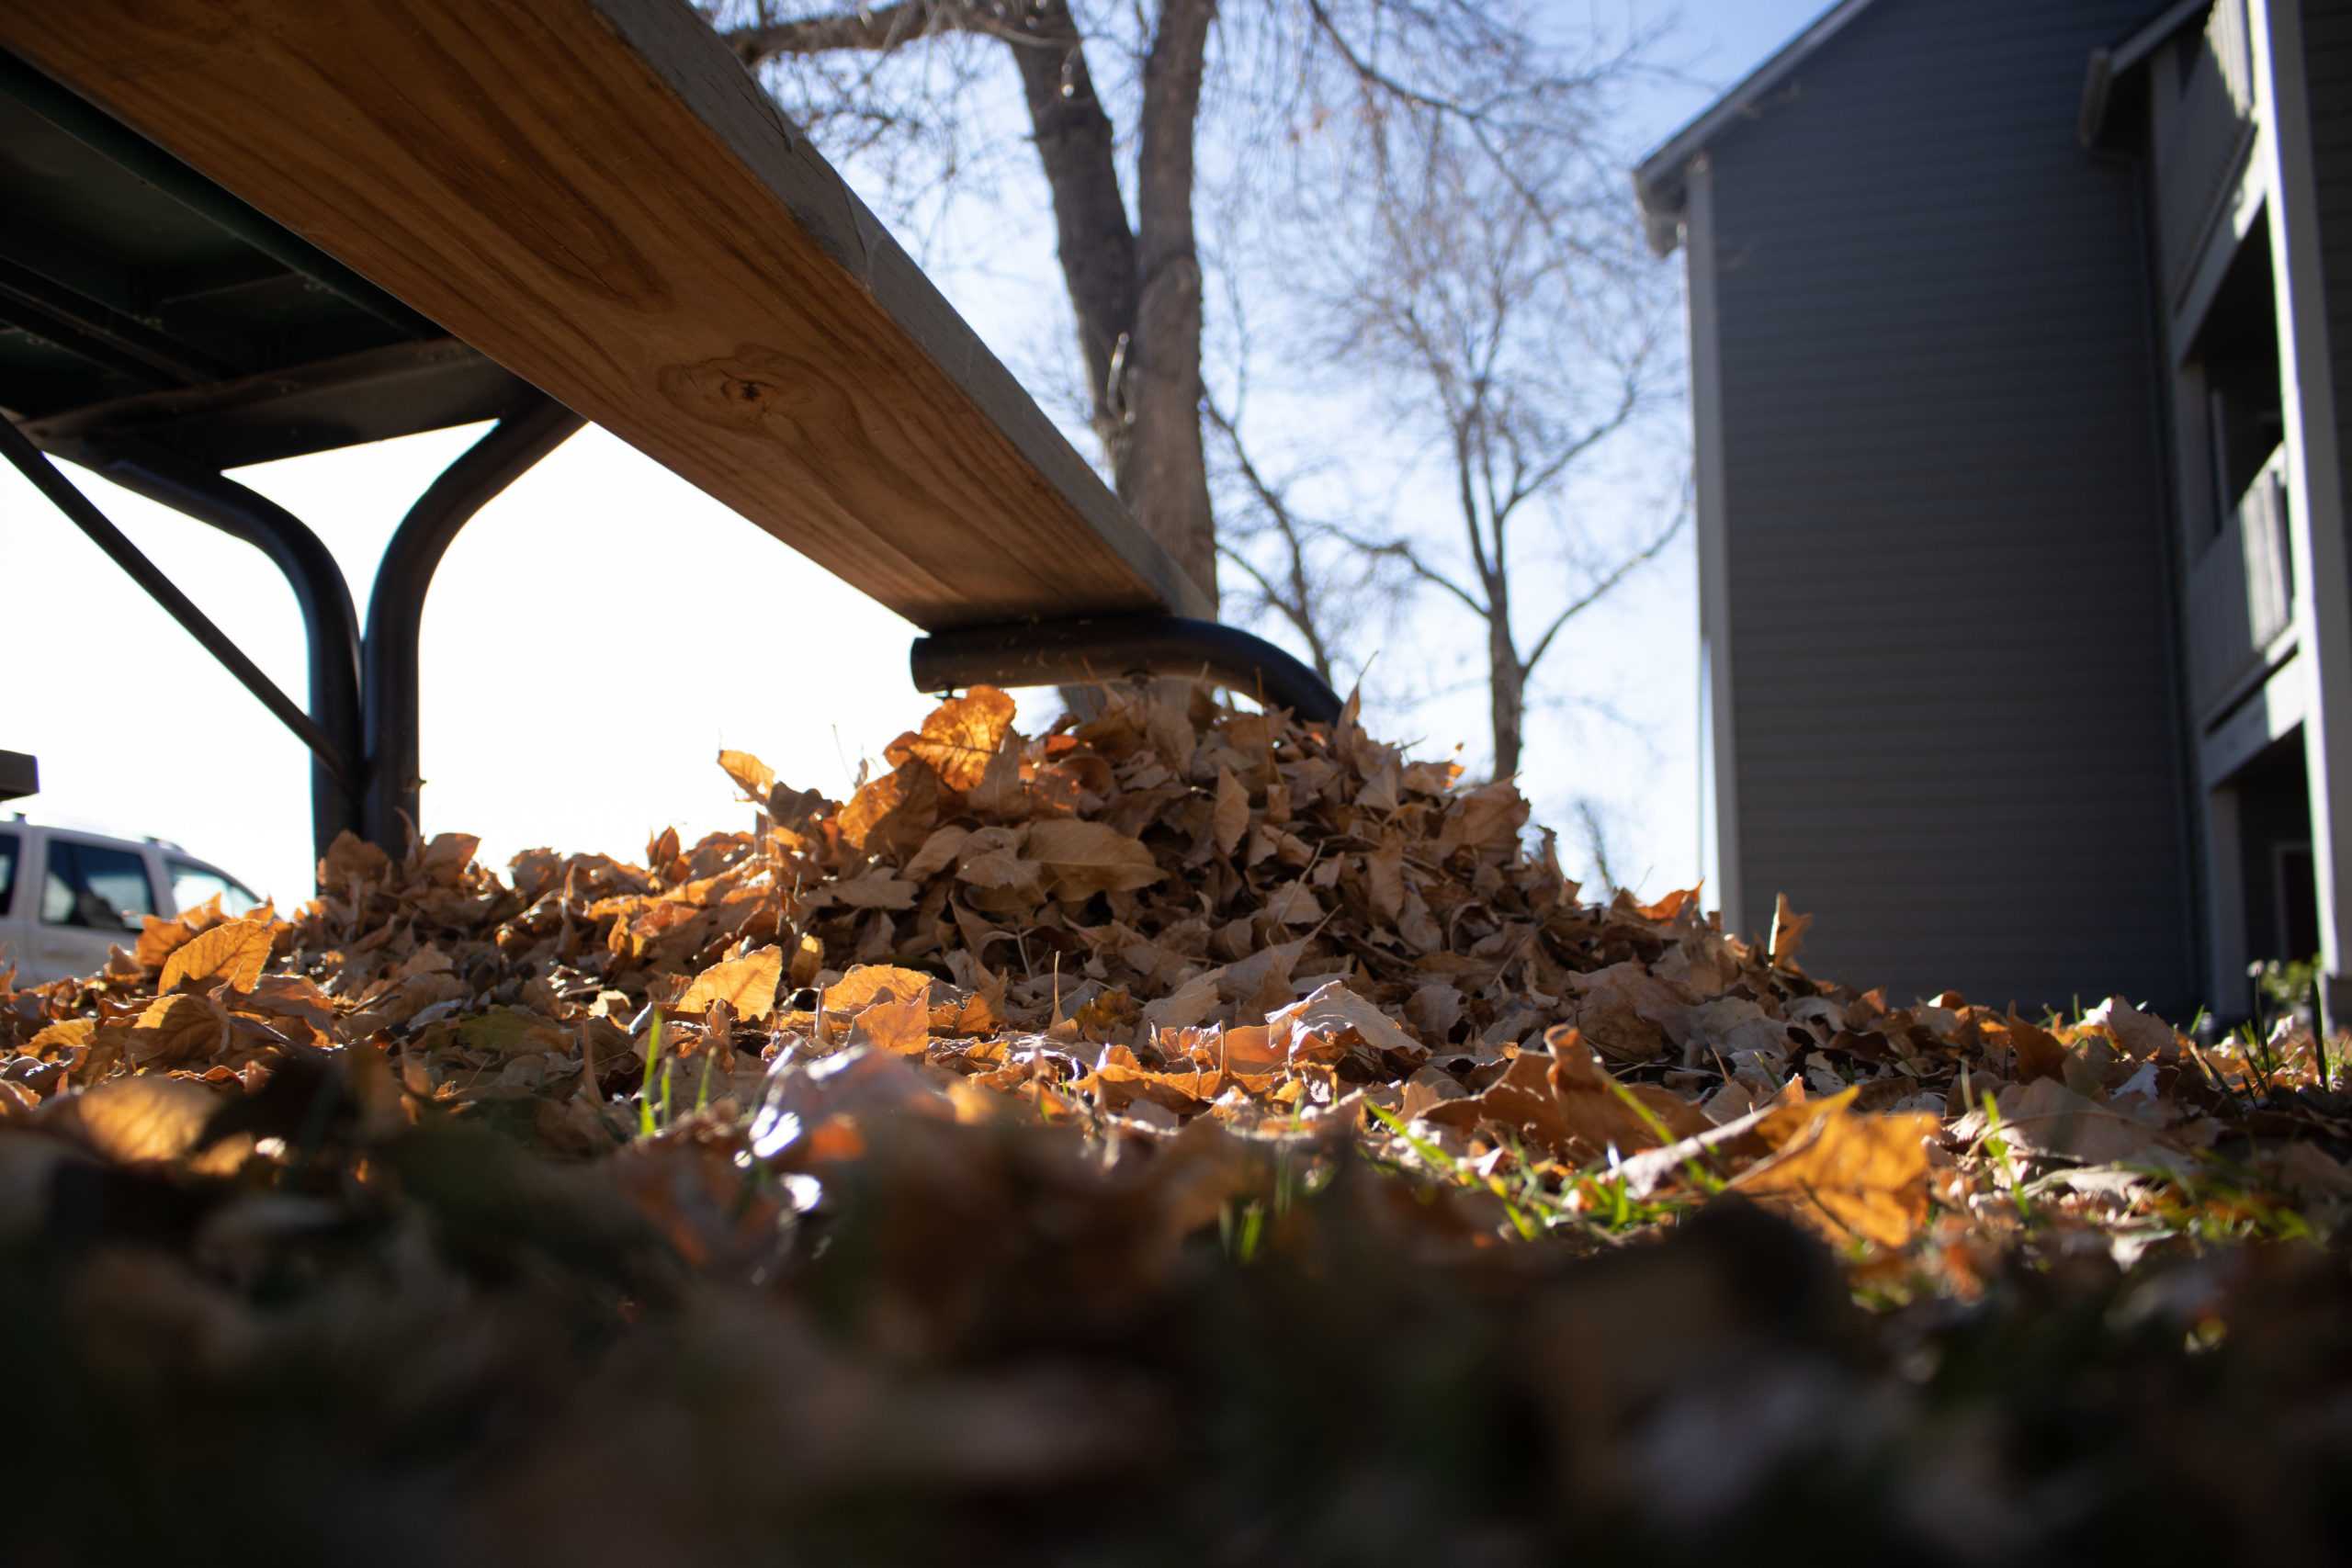 Leaves pile up under a bench